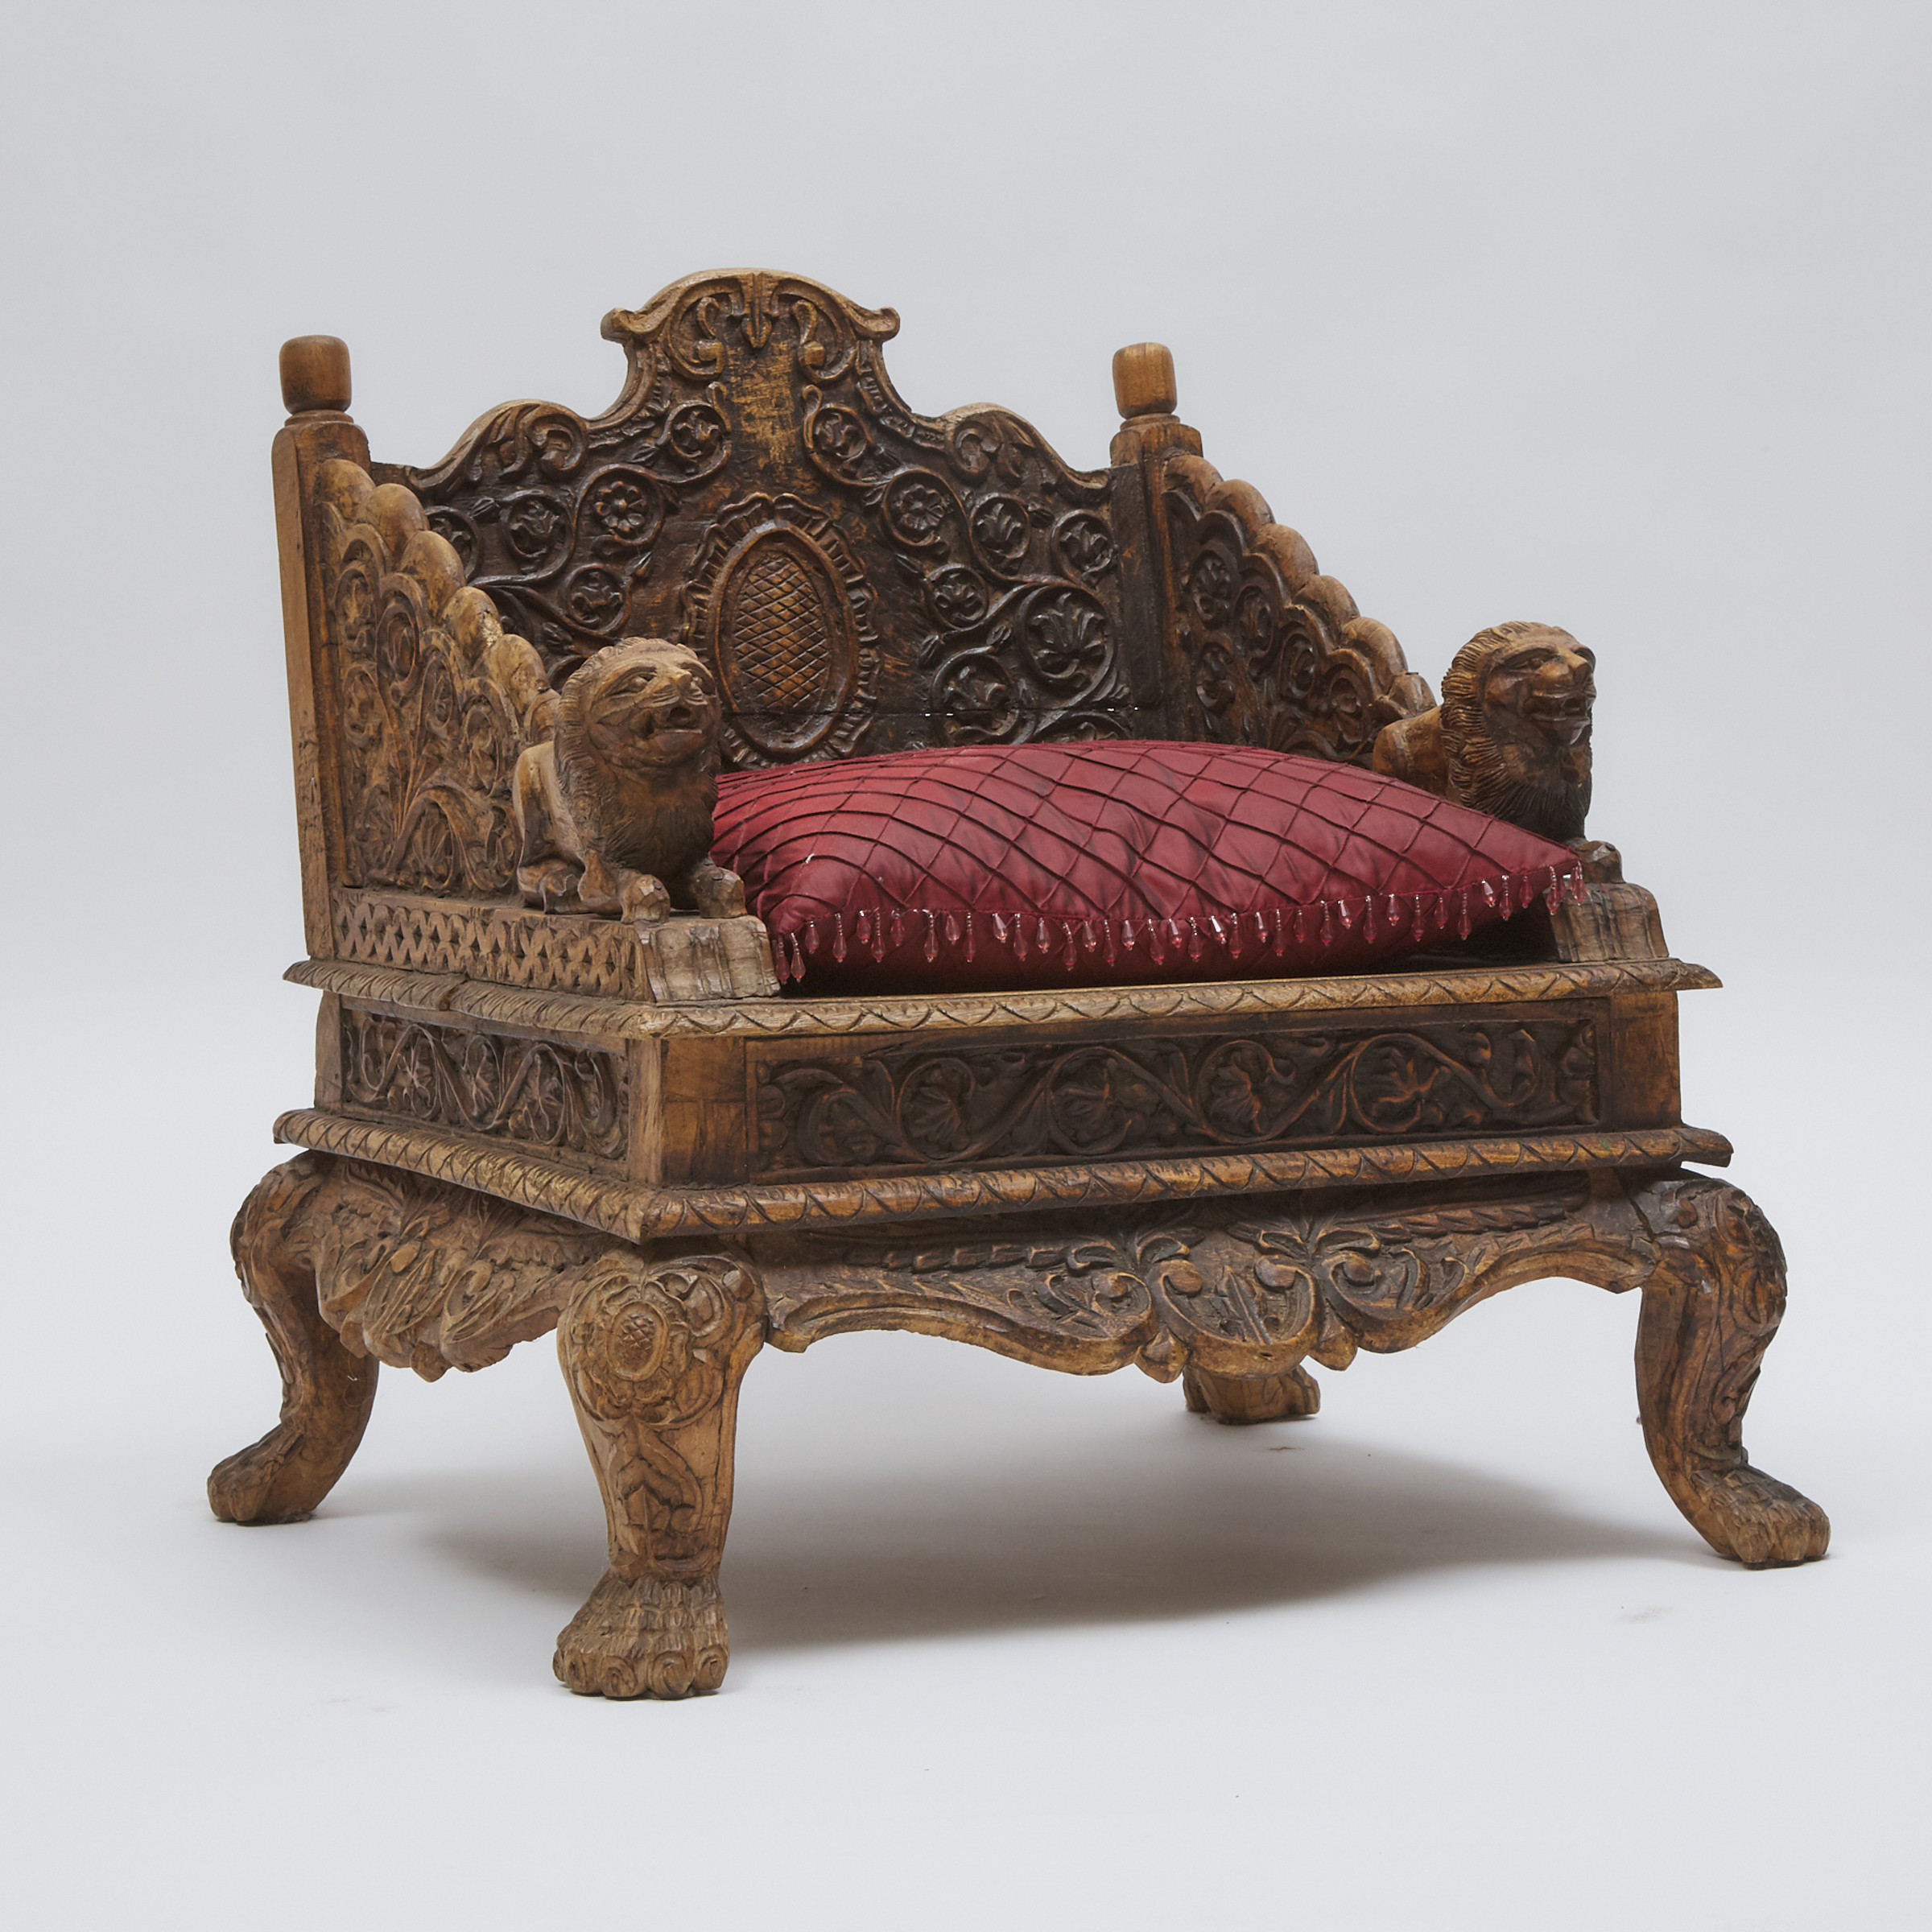 South East Asian Ceremonial Throne, 19th century